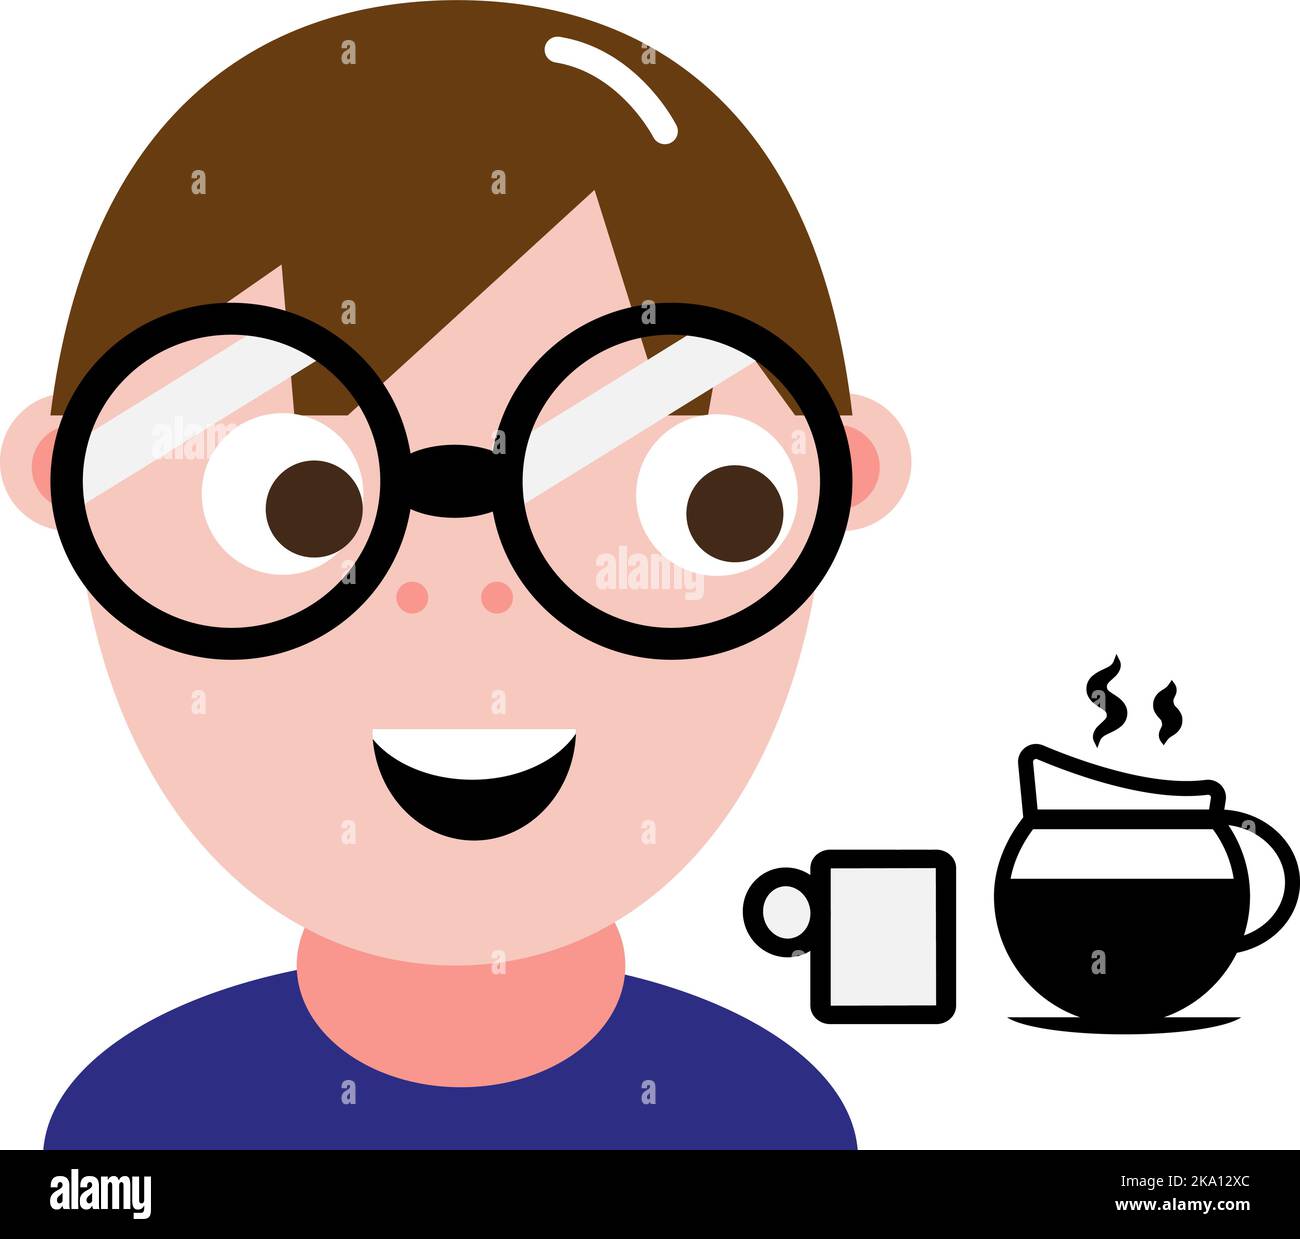 People with glasses drinking coffee, illustration or icon, vector on white background. Stock Vector